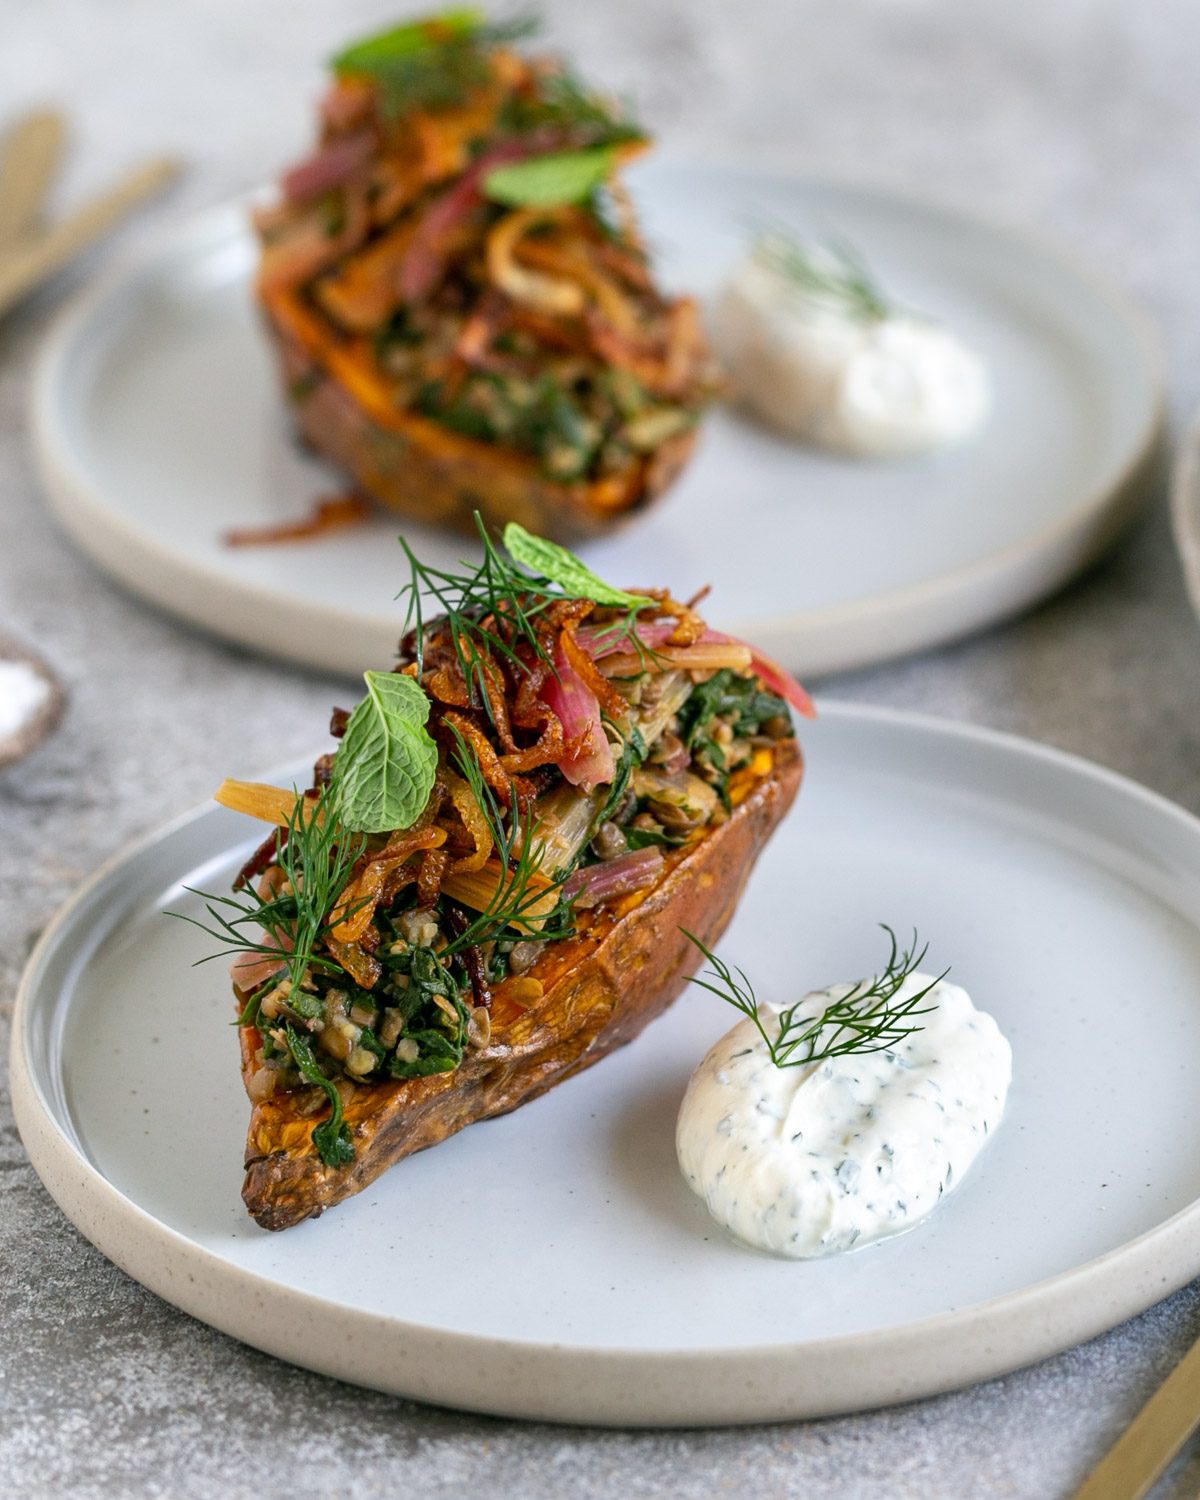 Baked sweet Potato with Lentils and Swiss Chard